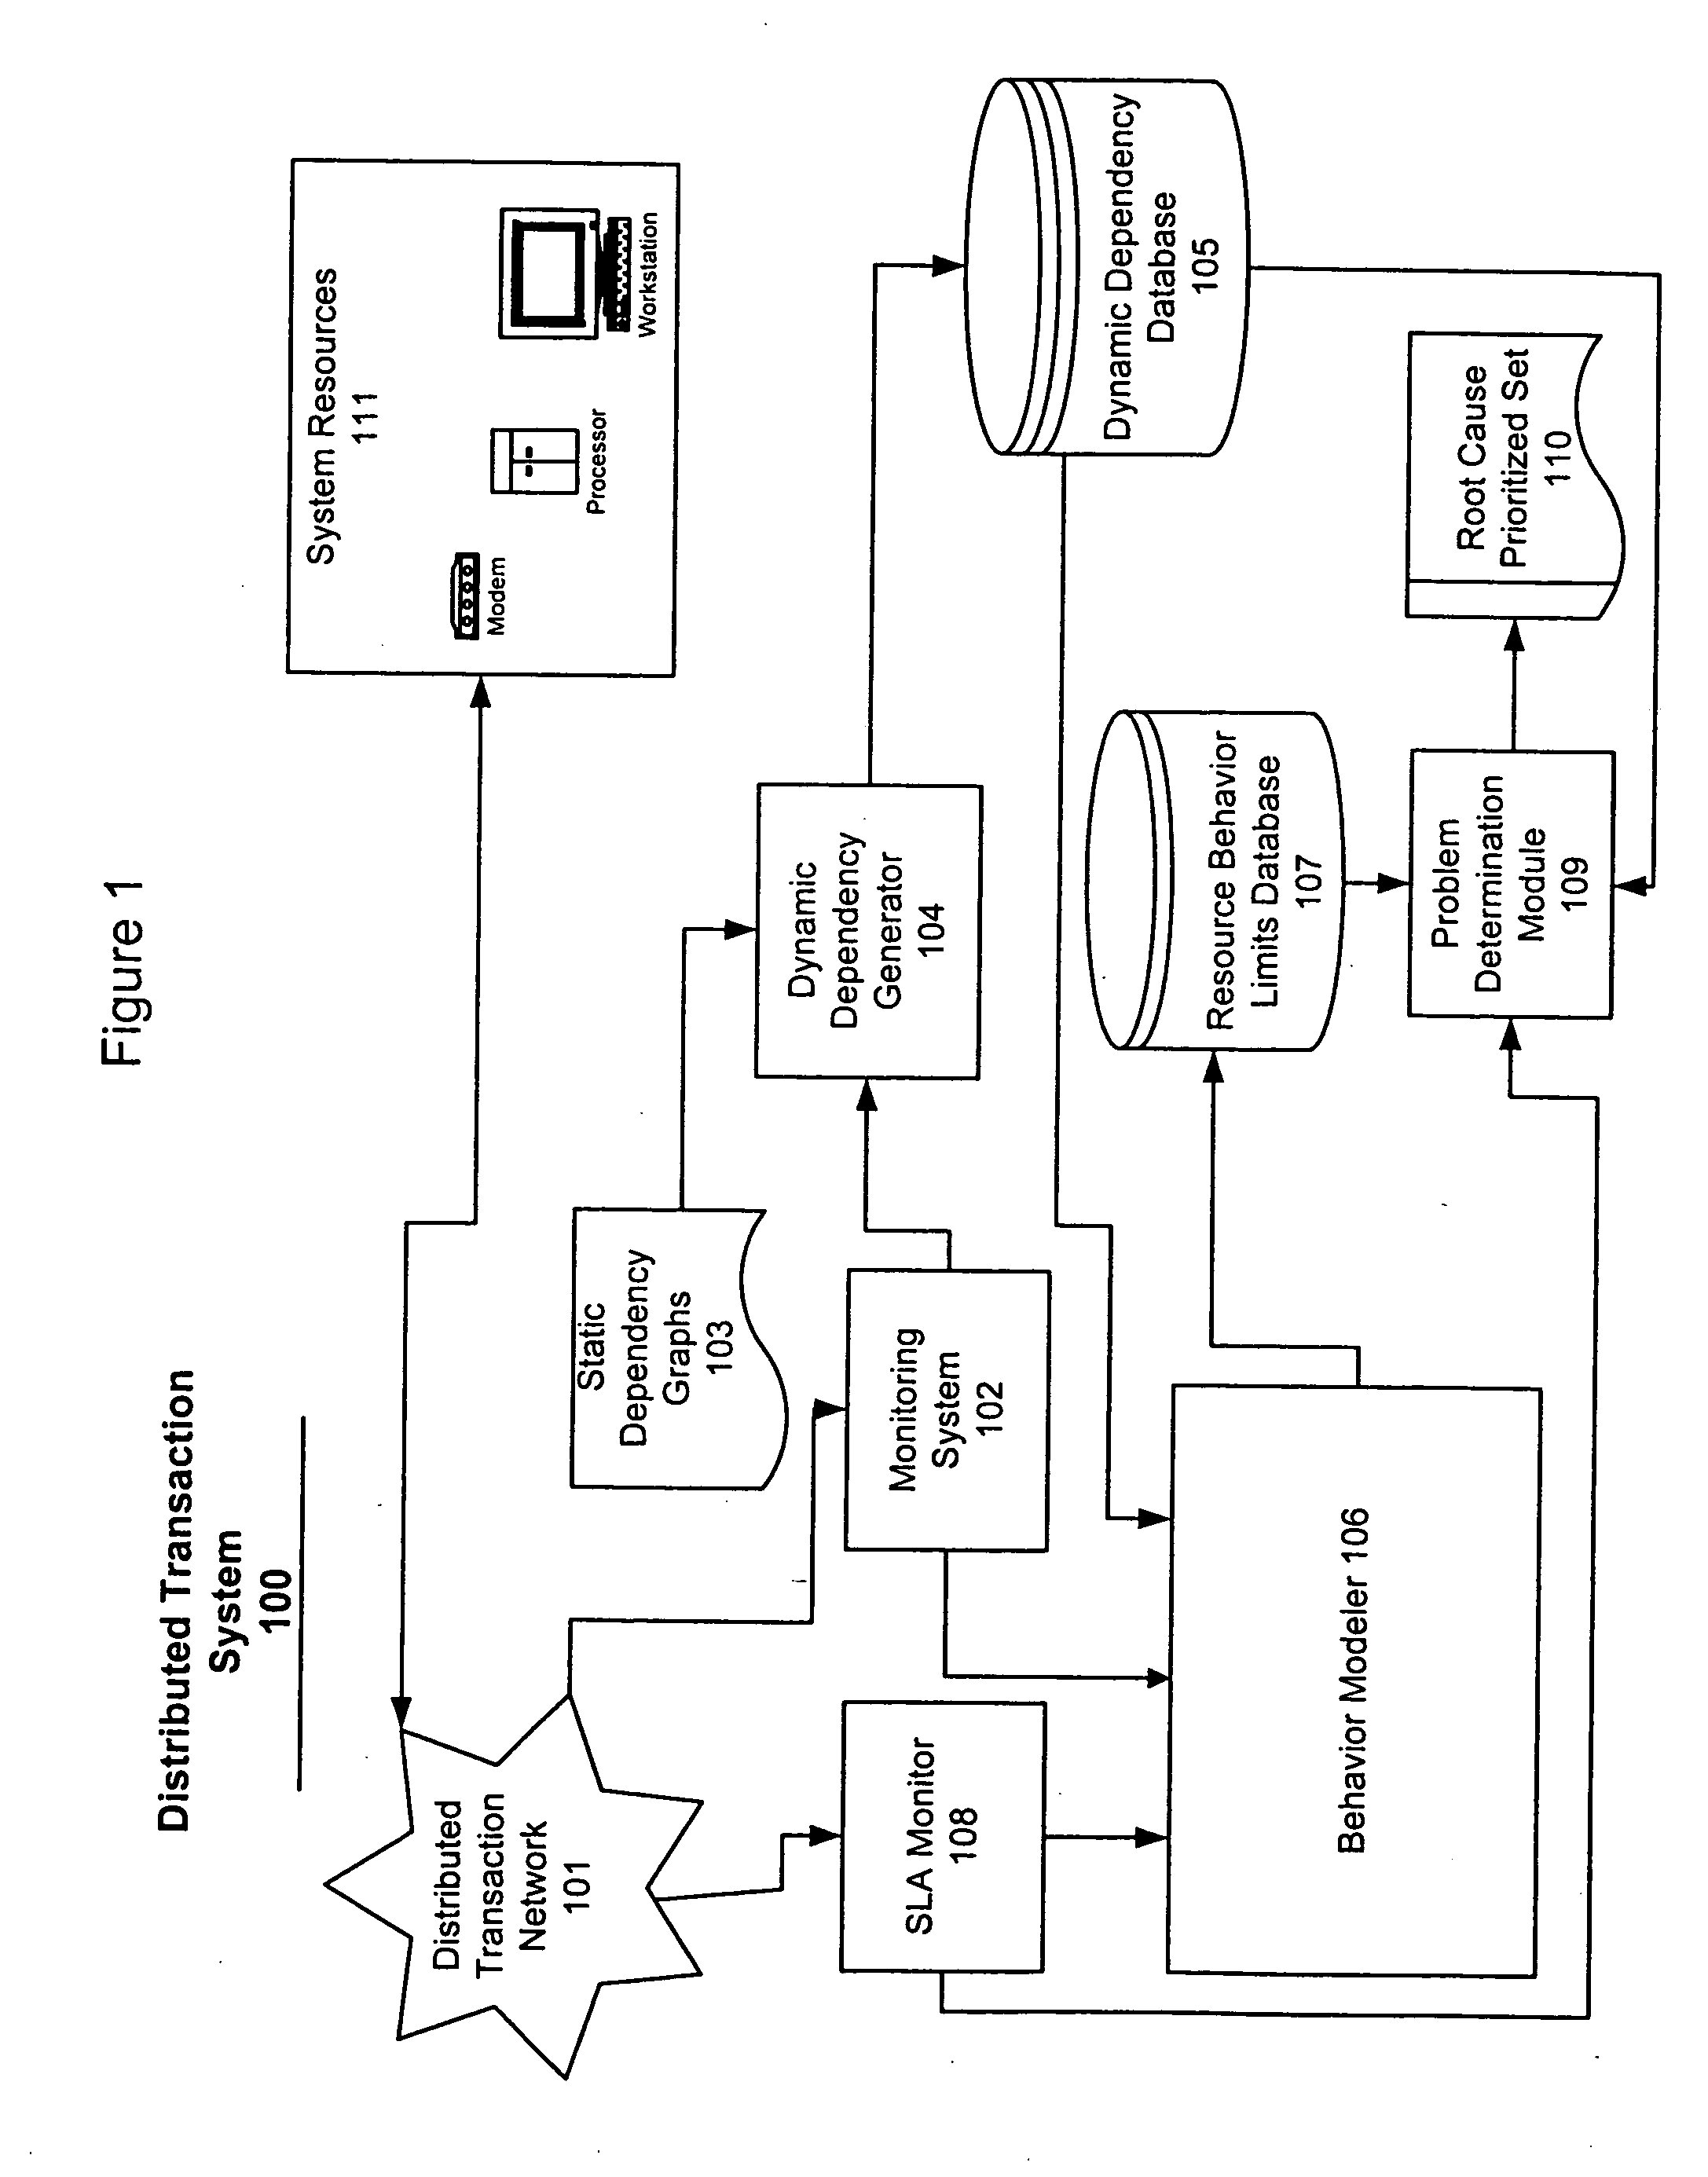 System and method for problem determination using dependency graphs and run-time behavior models